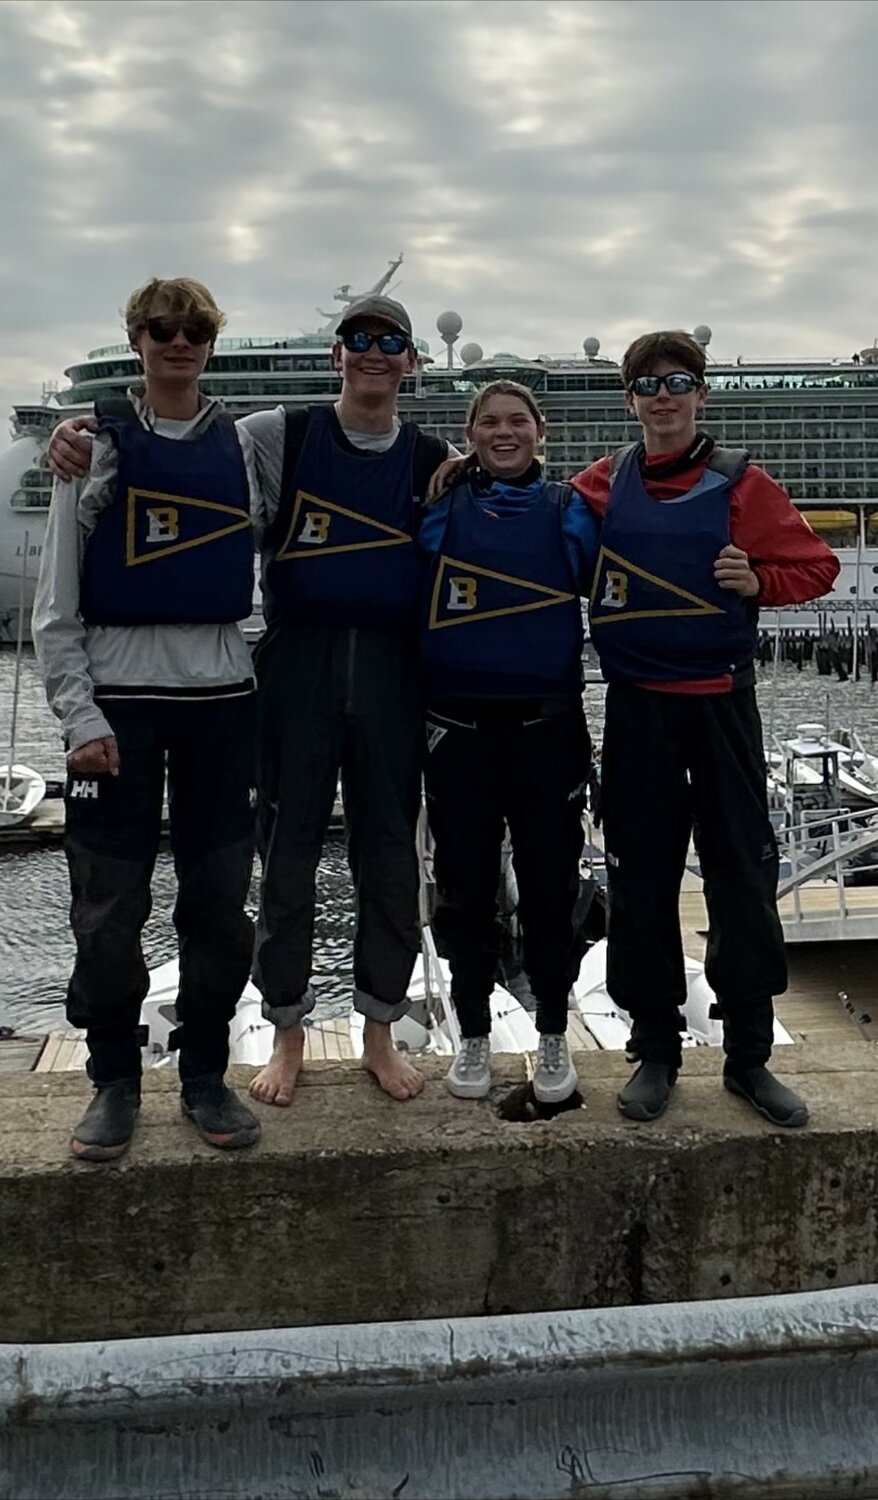 Barrington High School sailing team members Quin Schneider, Christopher Chwalk, Avery Guck and Duffy Macauley (from left to right) pose for a recent photo. Barrington will compete in the Keelboat Nationals next month.